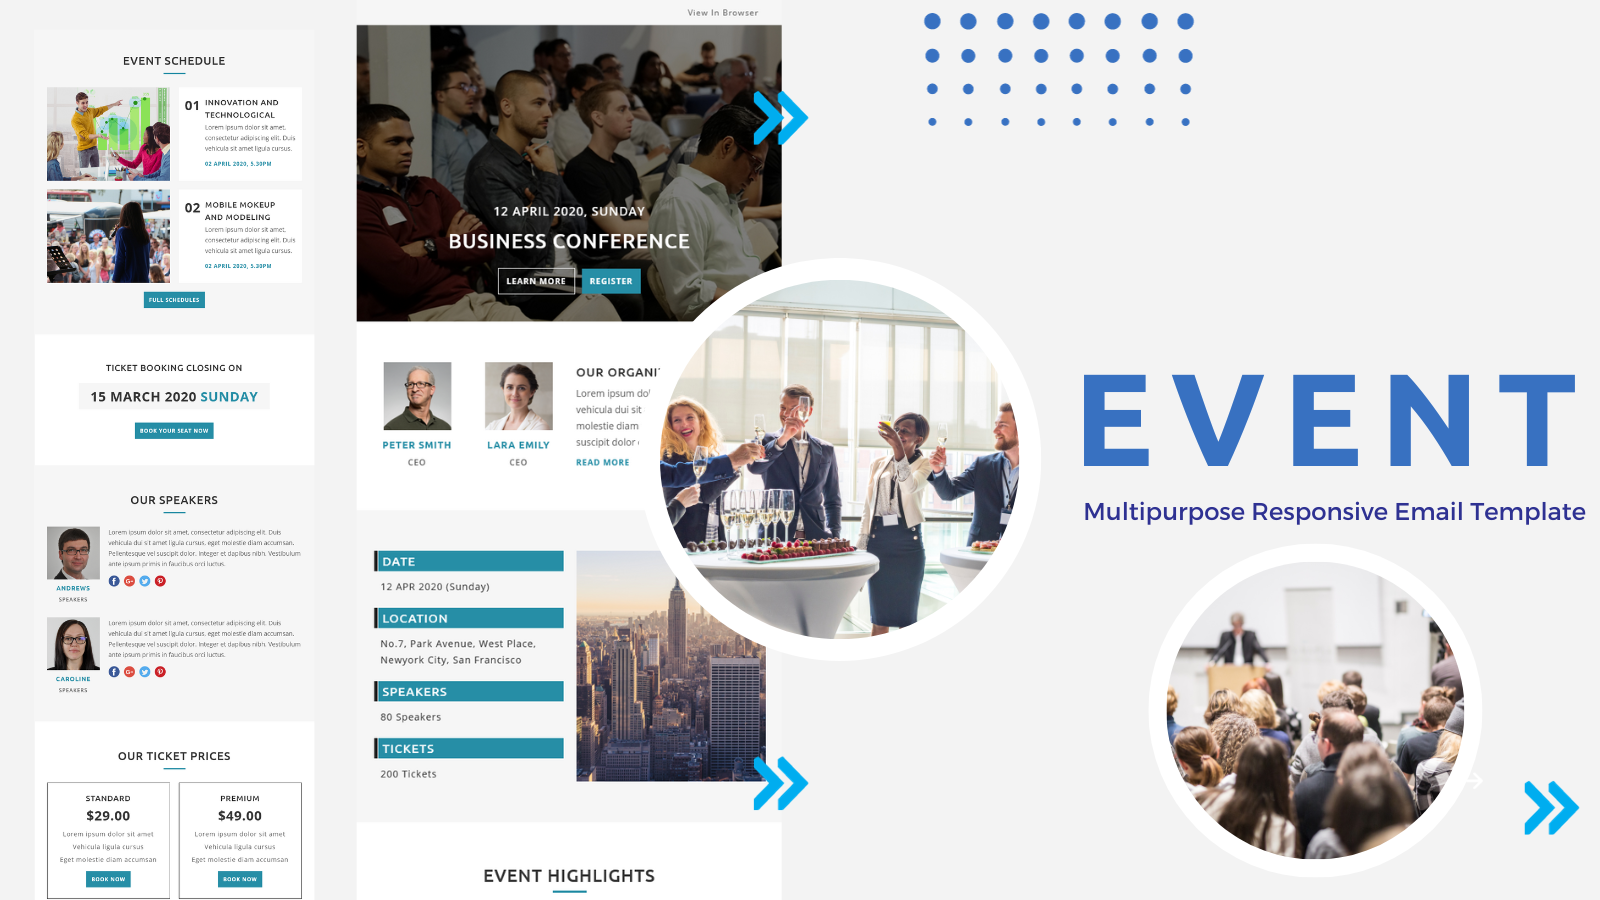 Events – Multipurpose Responsive Email Template